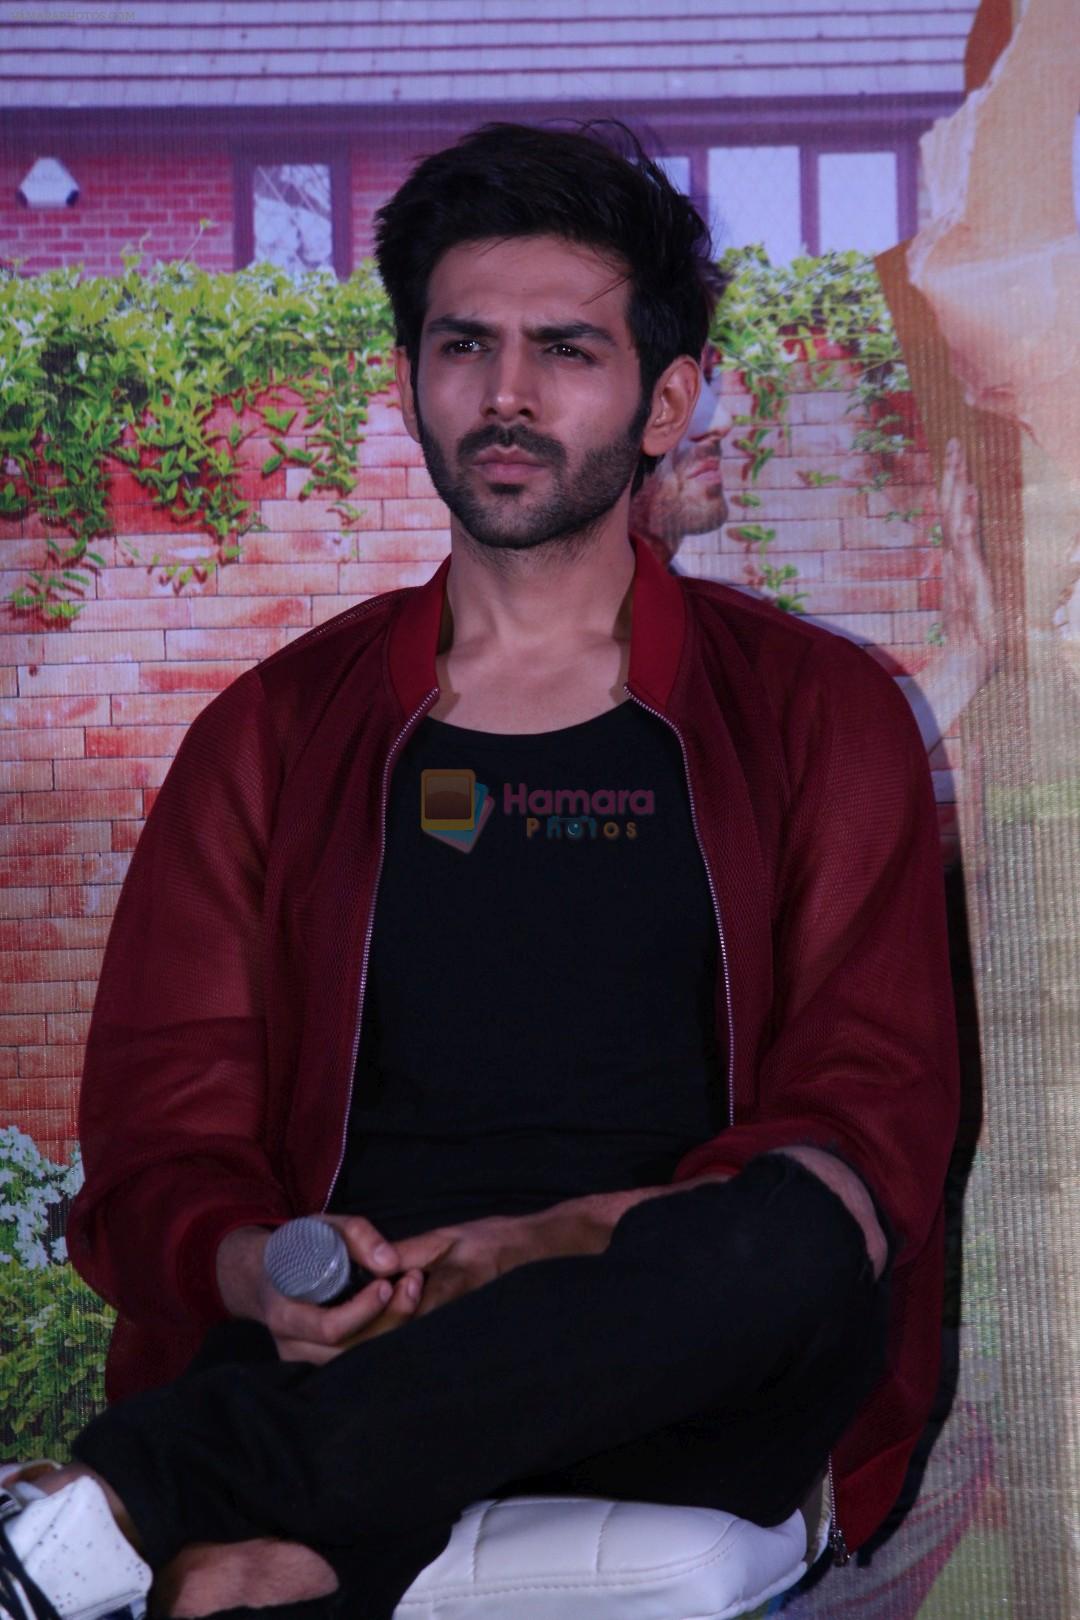 Kartik Aaryan at the Press Conference of film Guest Iin London on 3rd July 2017